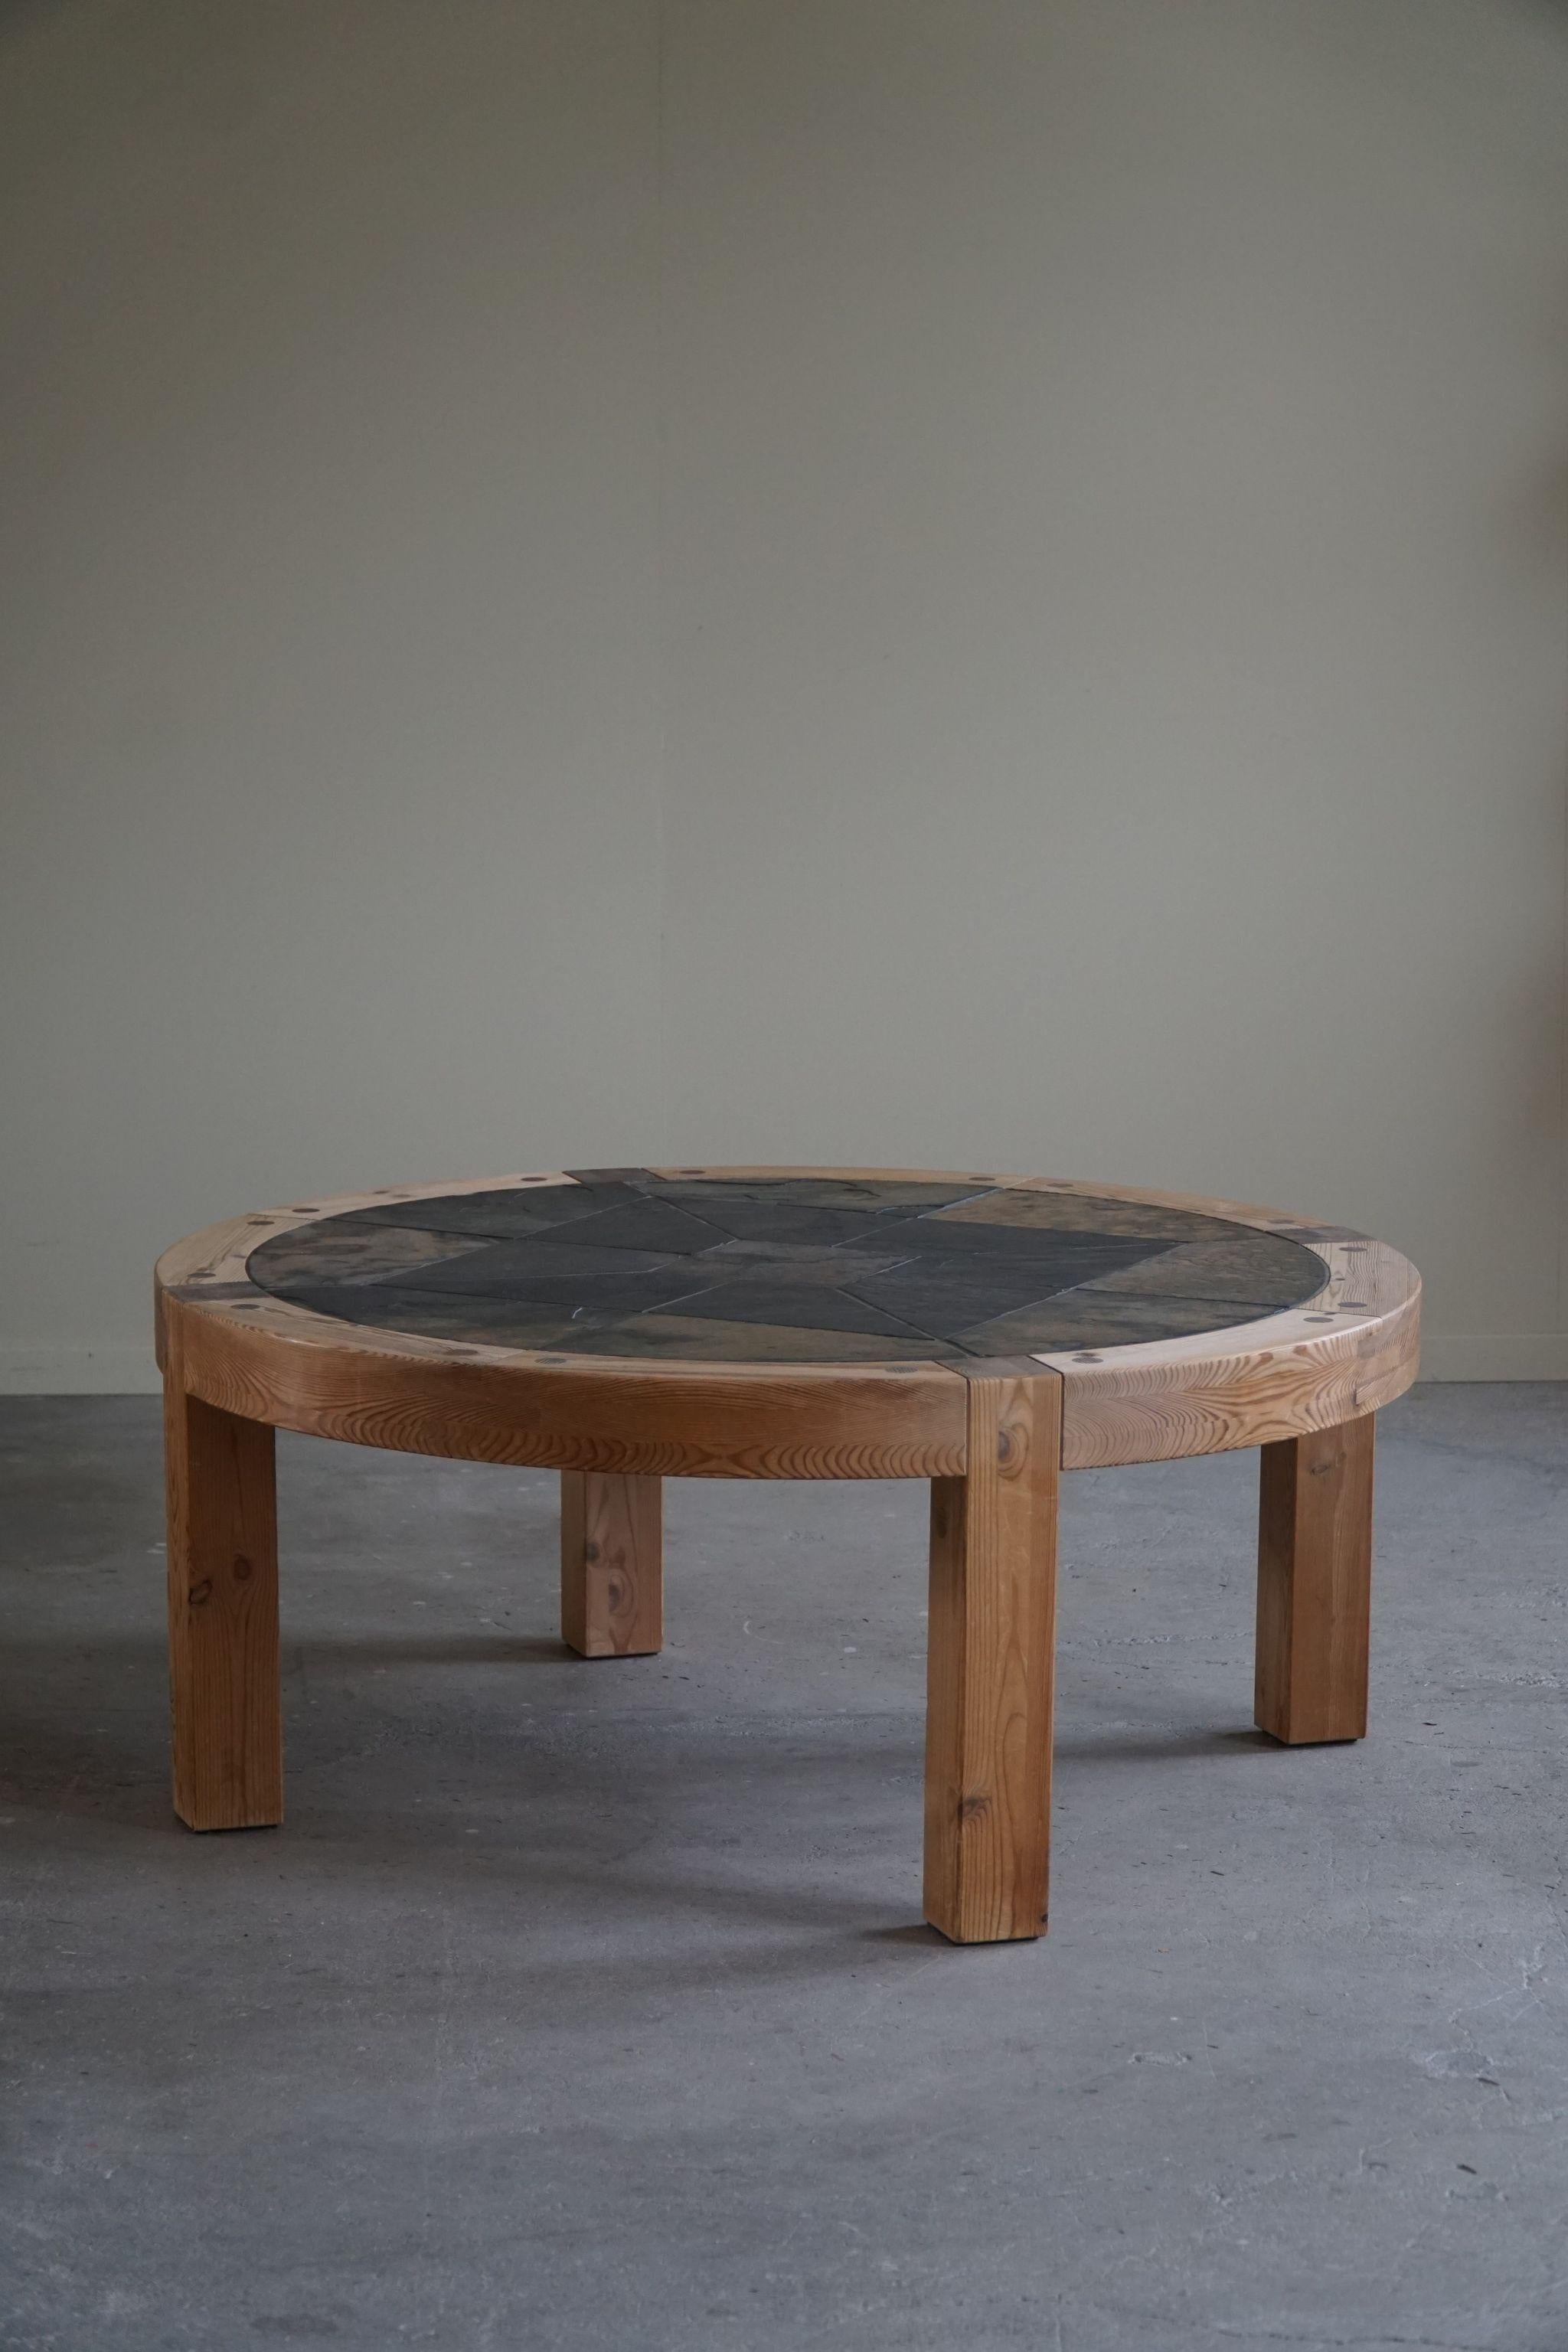 Large Round Coffee Table in Pine & Ceramic by Sallingboe, Danish Design, 1970s For Sale 6